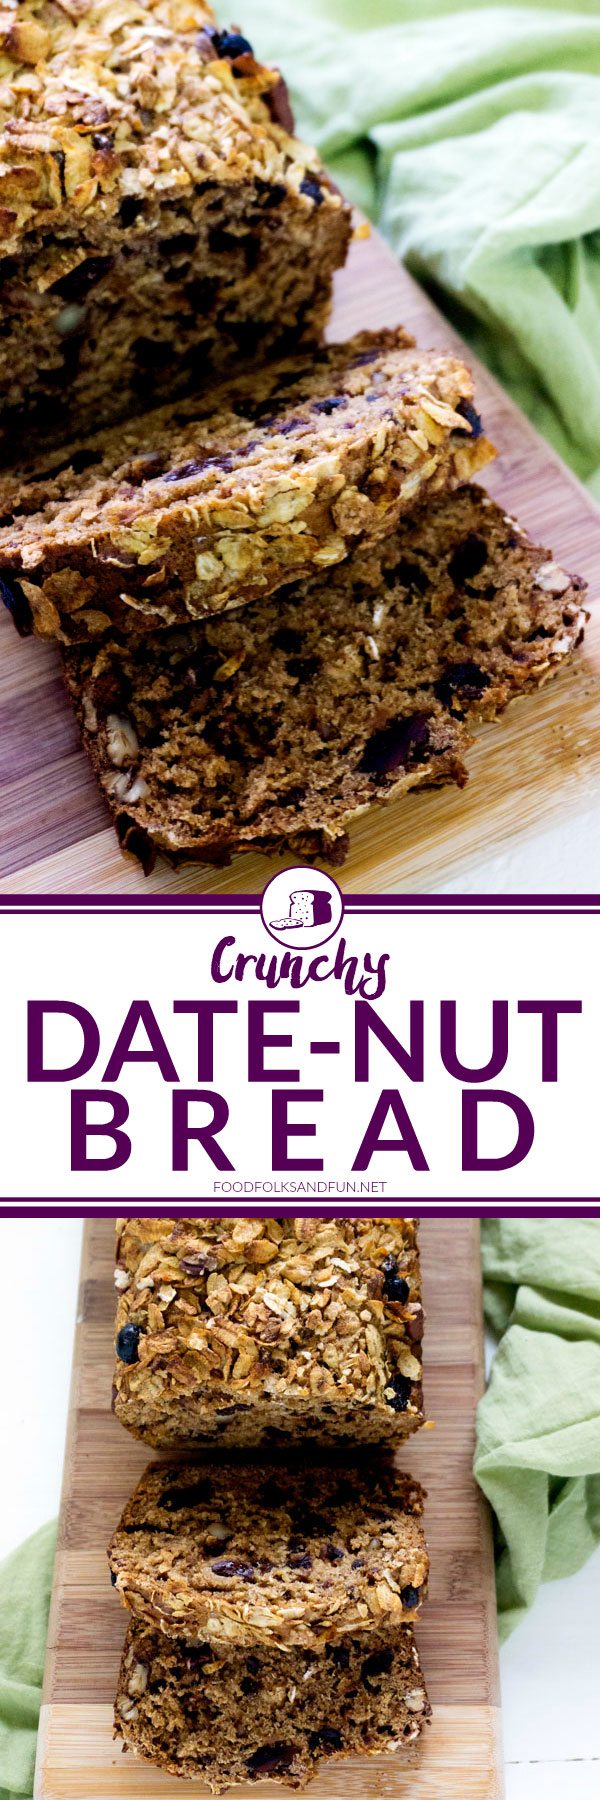 This Date Nut Bread Recipe is delicious, hearty, and so tasty. It has a crunchy topping, and it's one of my favorite ways to start the day!